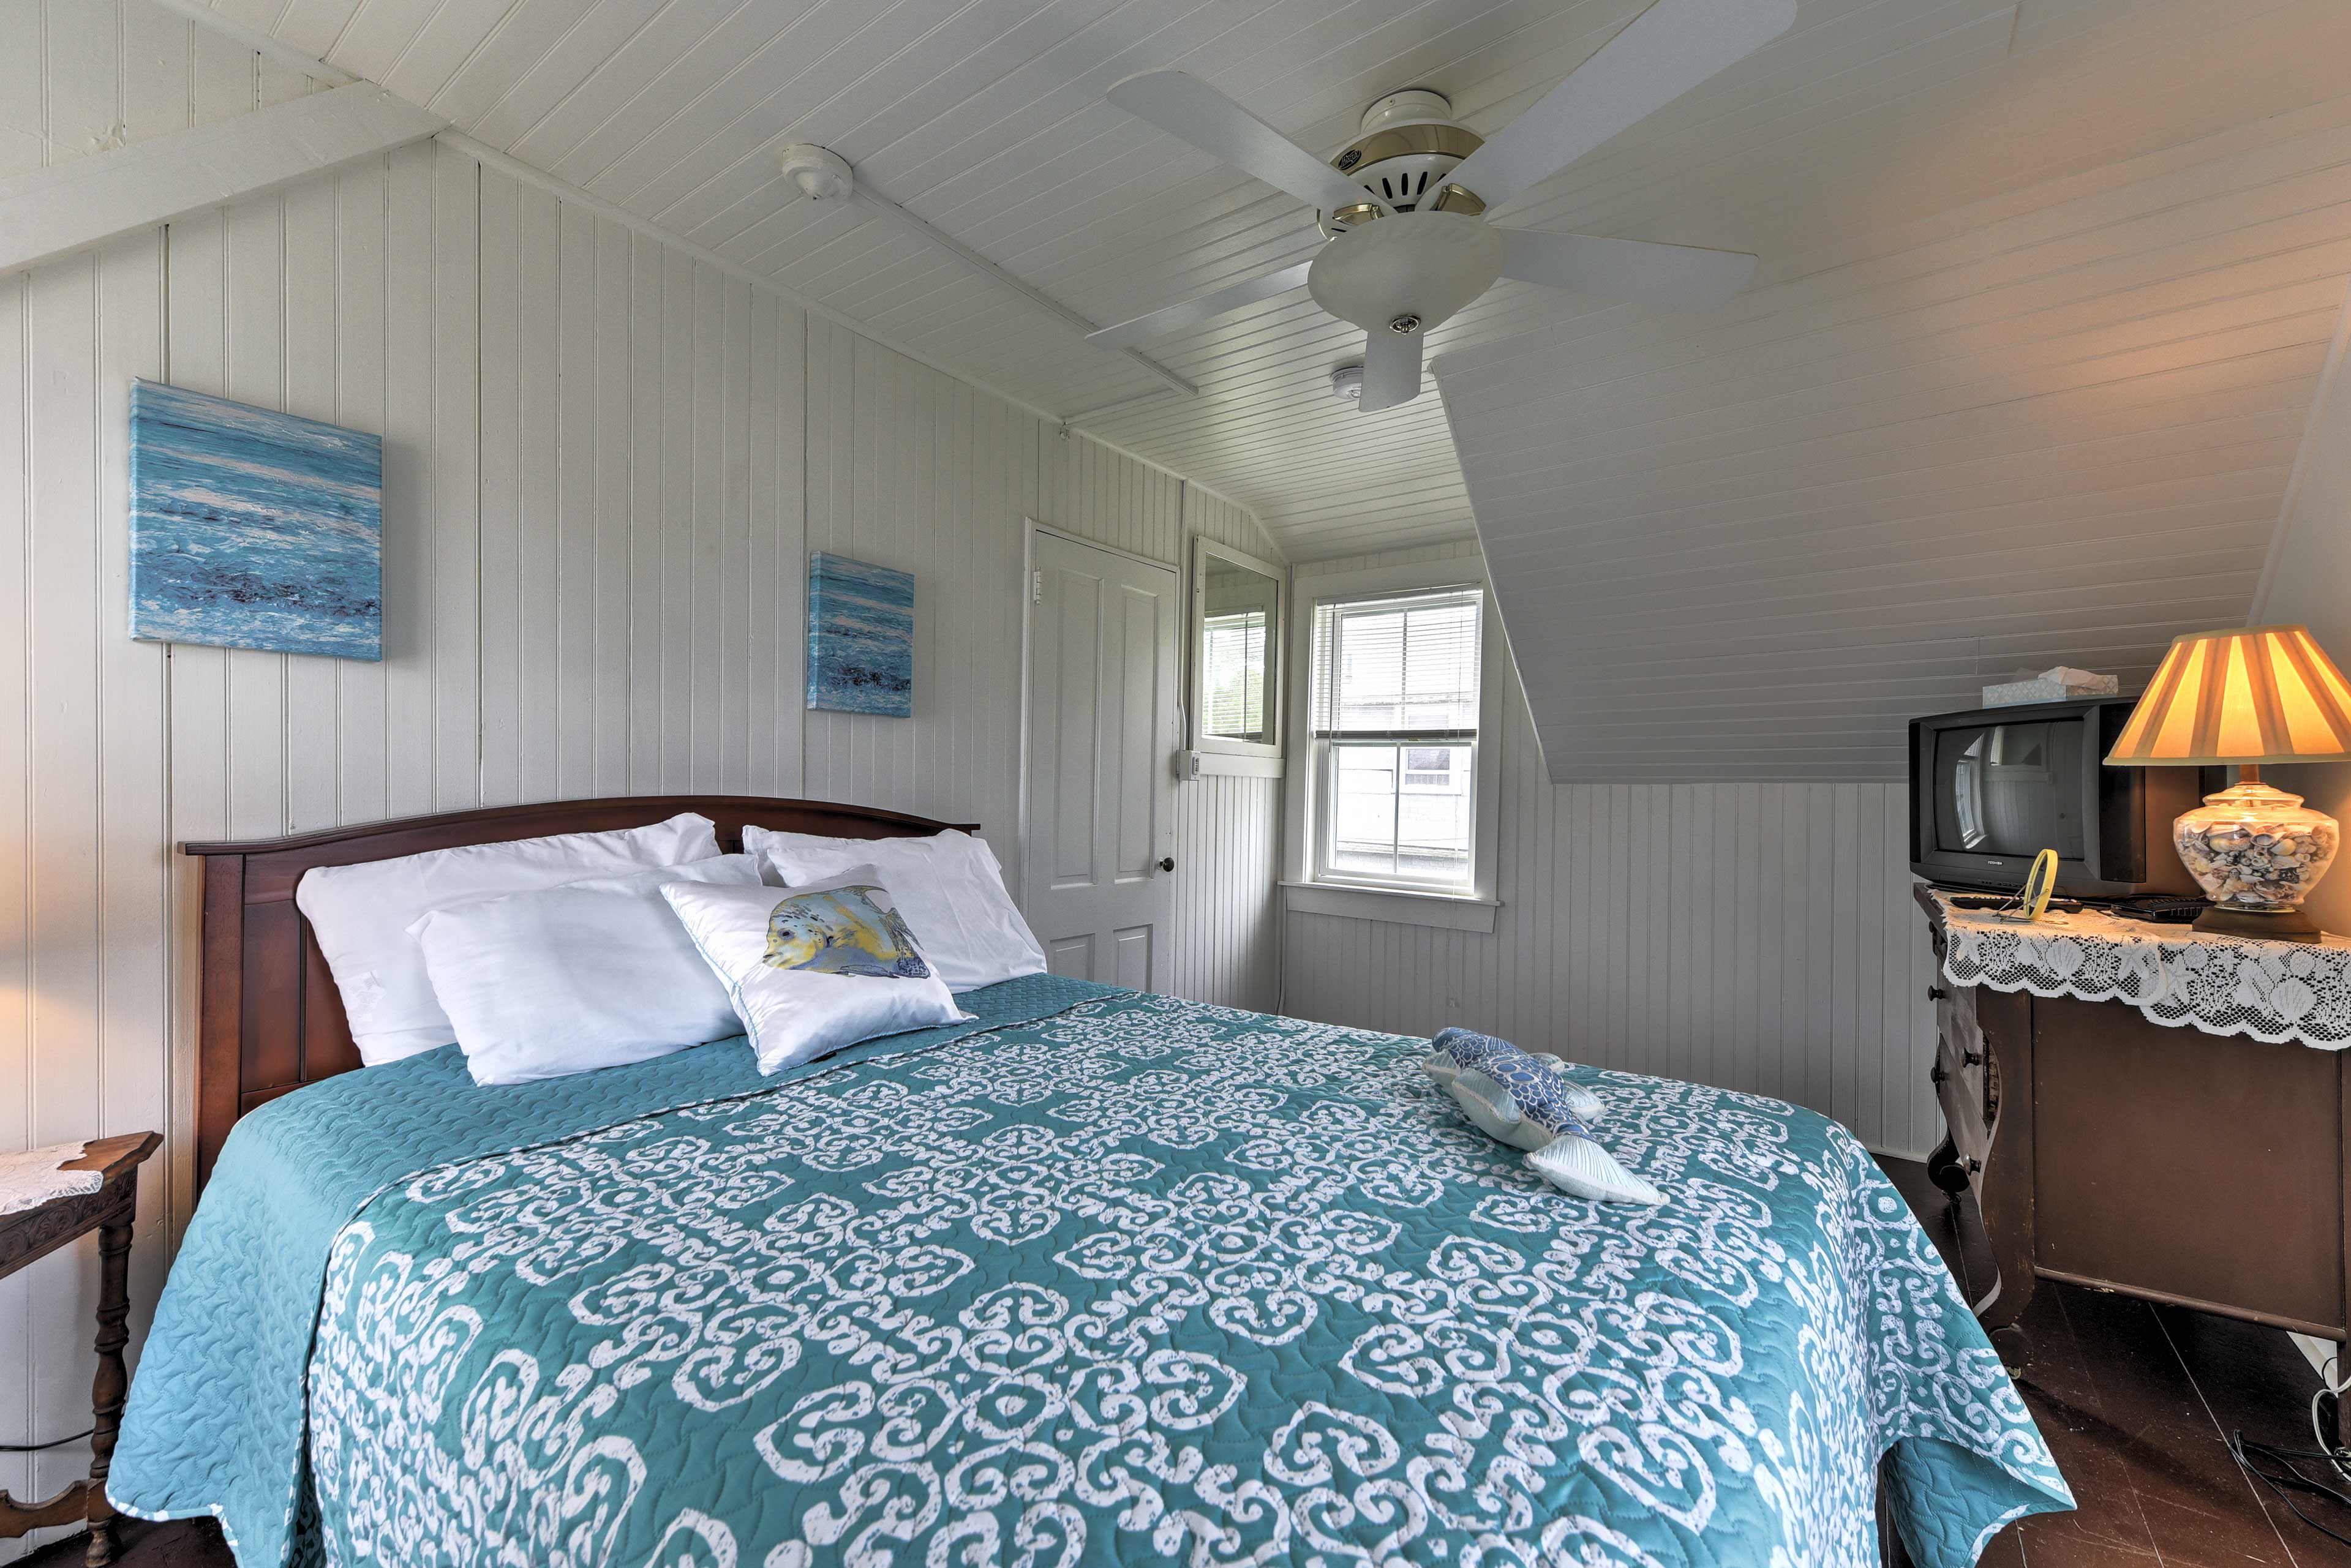 Guests can sleep in their choice of 3 comfortable bedrooms.